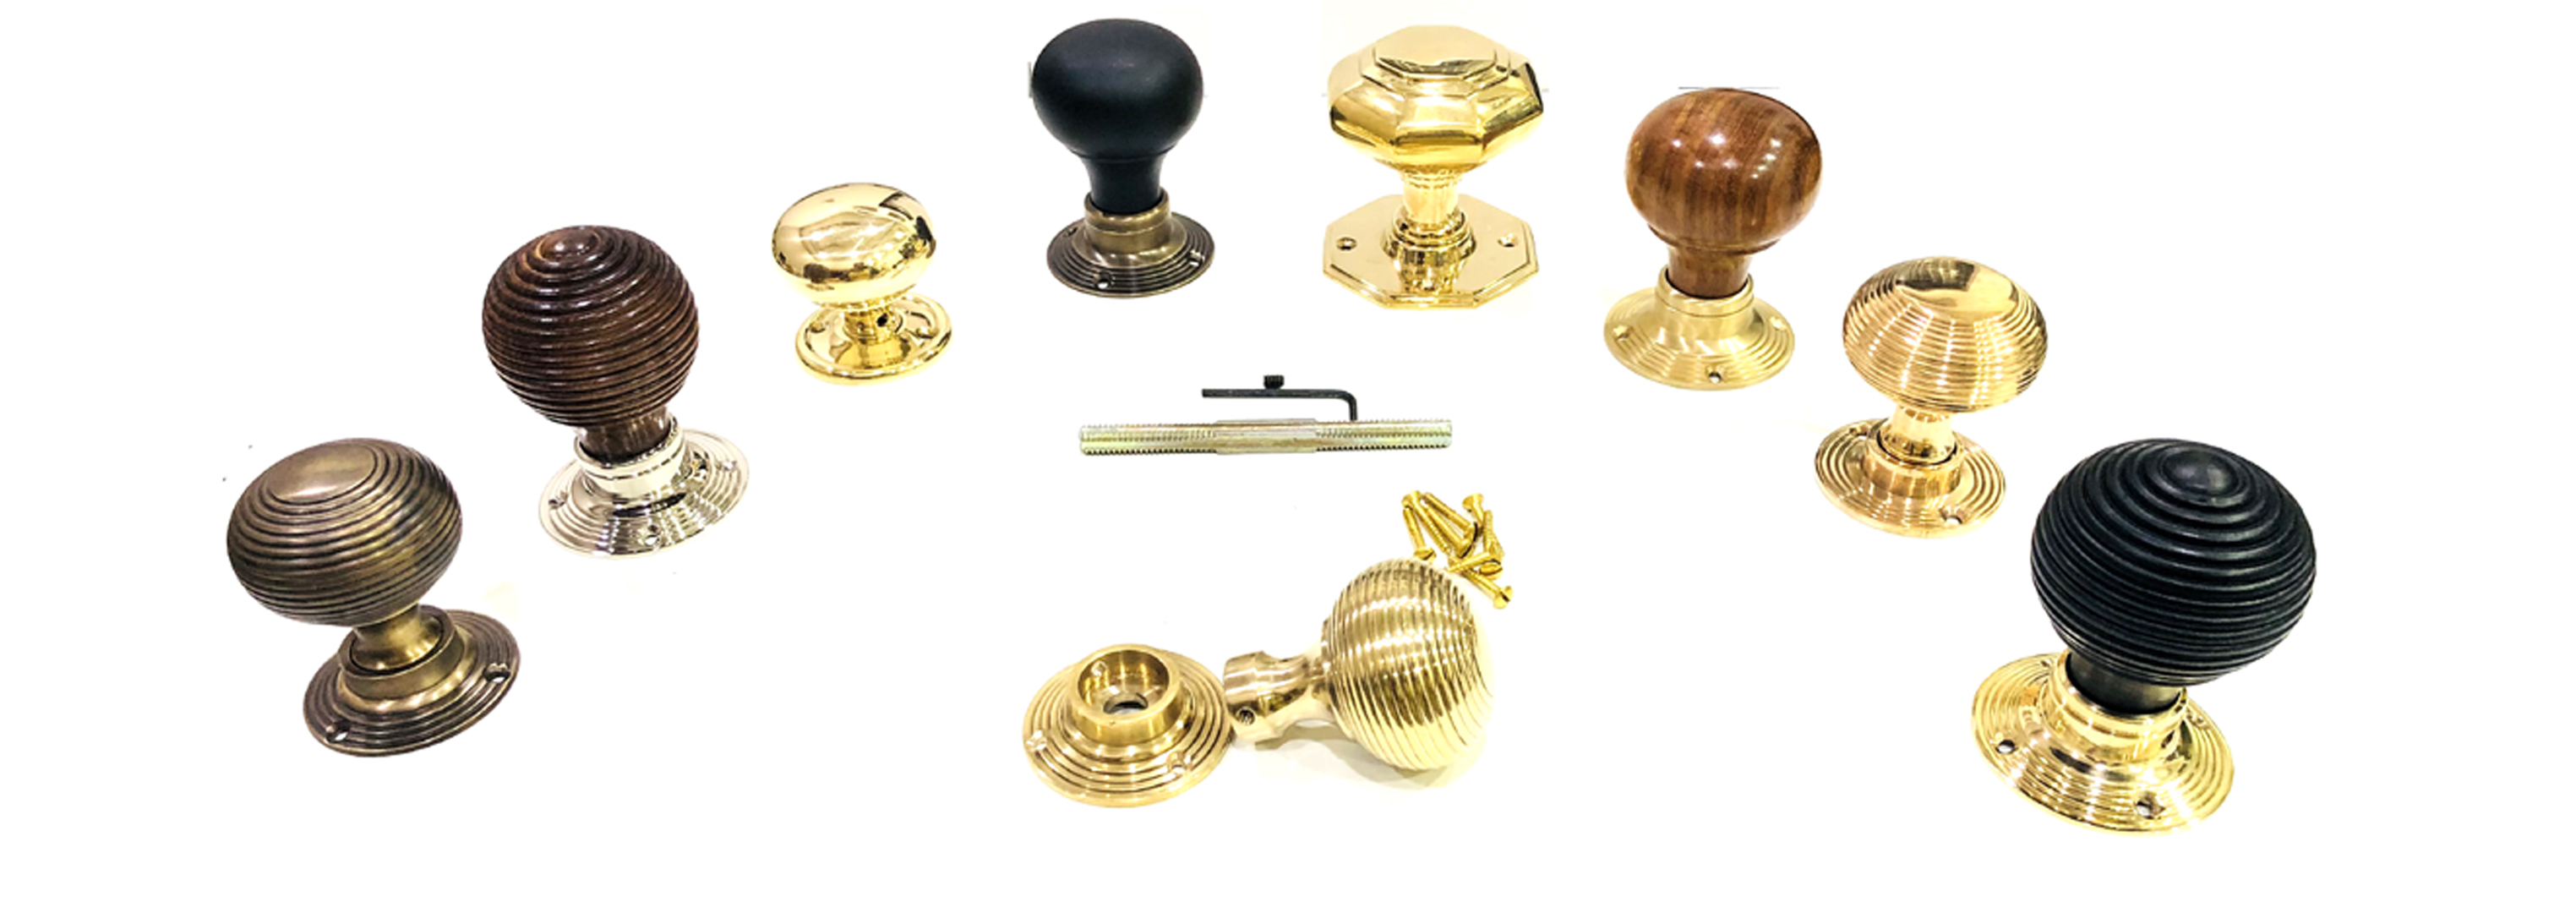 IMMACULATELY MADE DOOR KNOBS